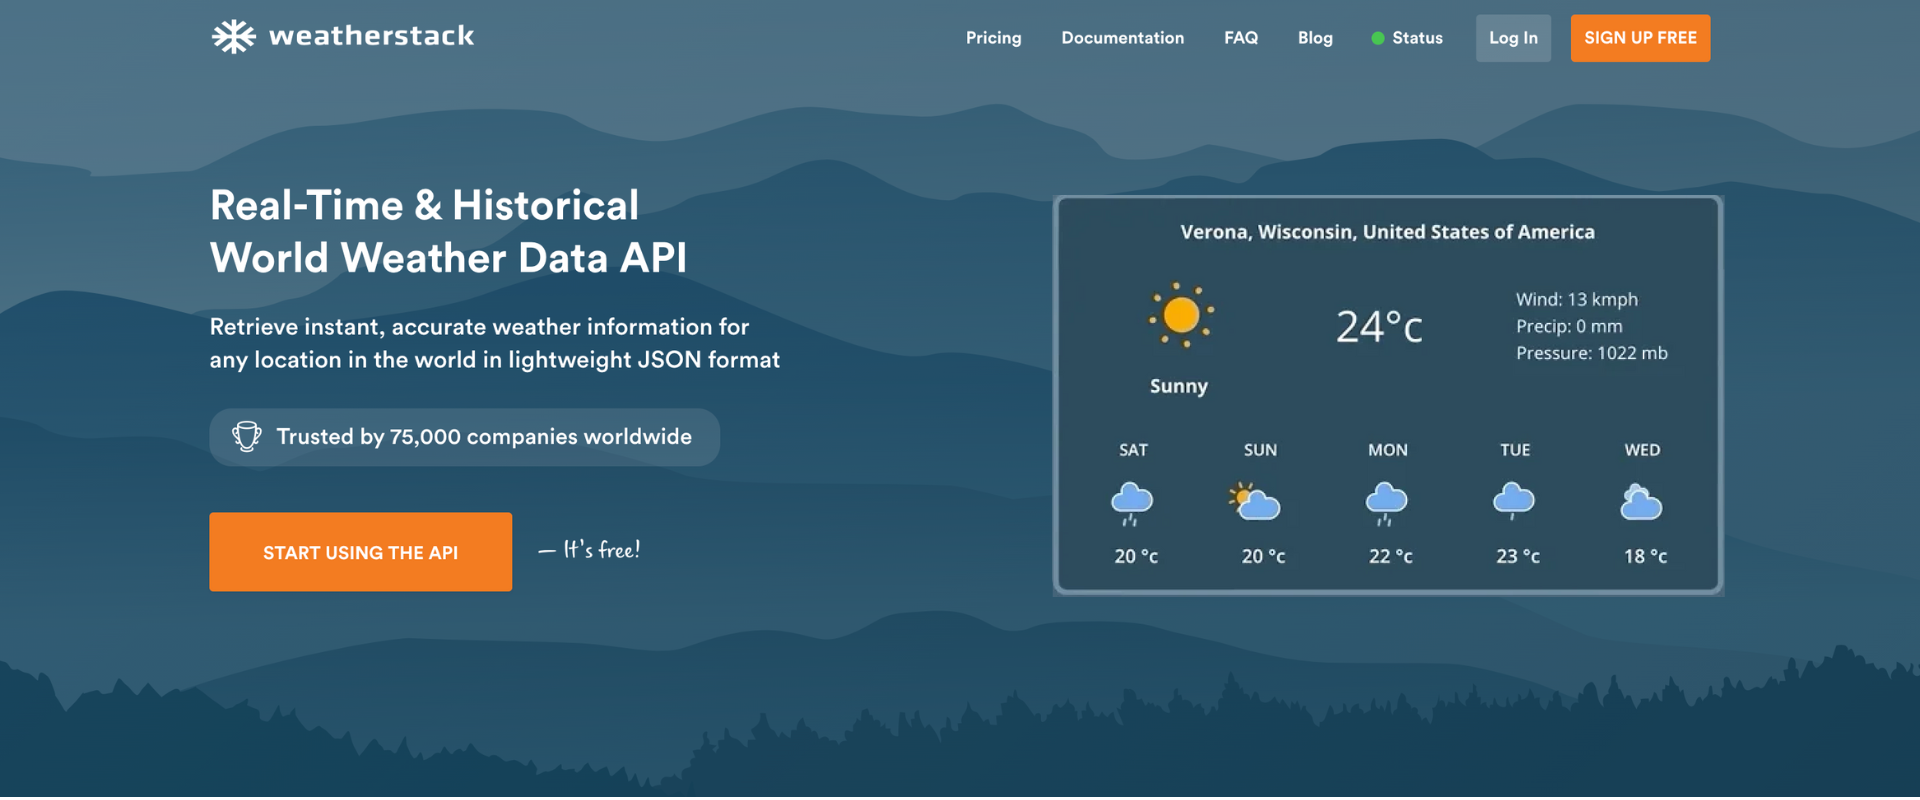 weatherstack Weather API home page